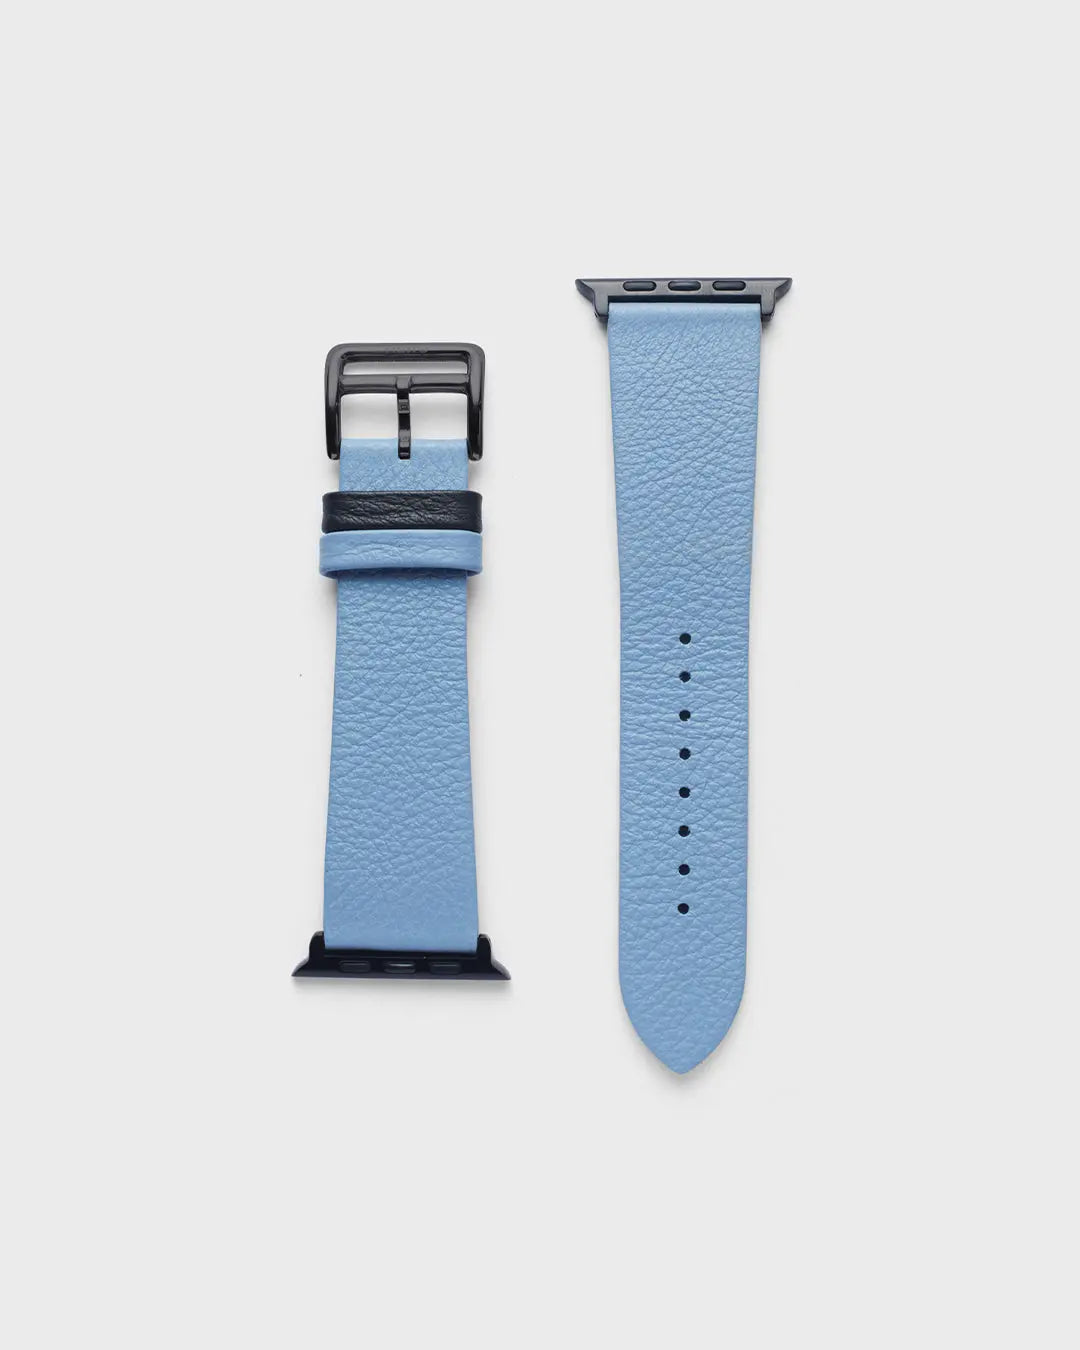 VIBE STRAP - FOR APPLE WATCH [Seamless in Italian full grain pebble leather] HEllO